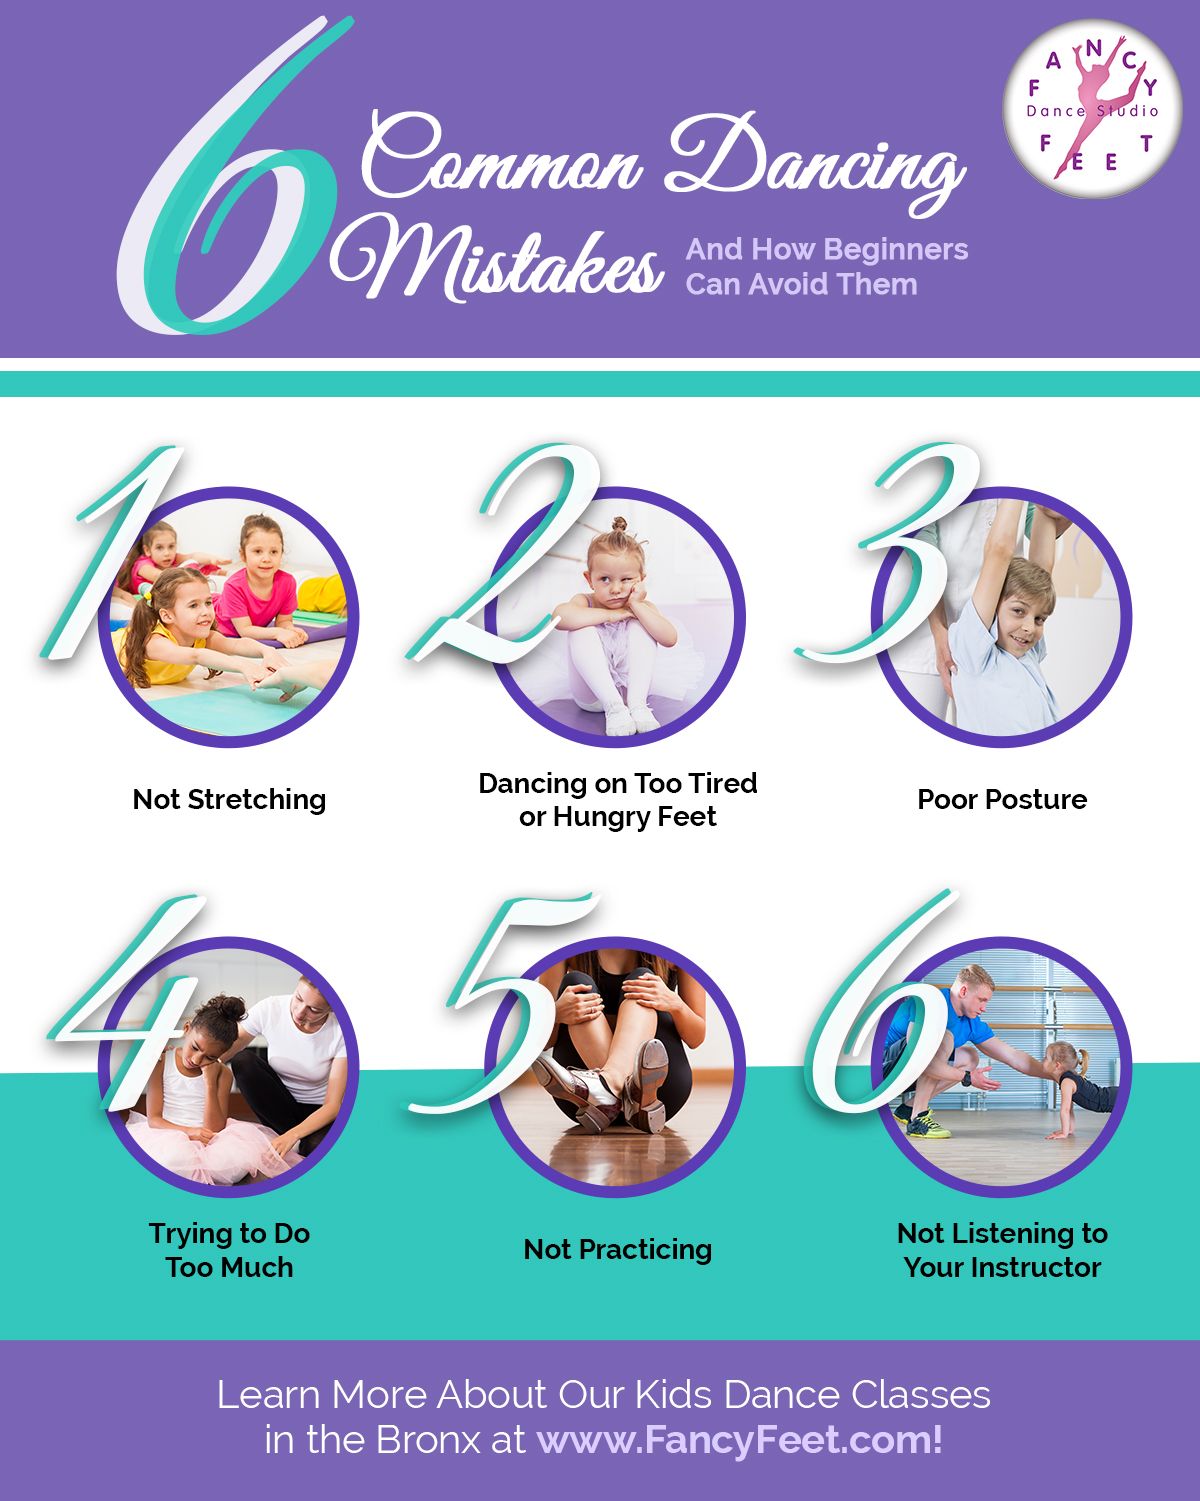 6-Common-Dancing-Mistakes-and-How-Beginners-Can-Avoid-Them-6215922fefc6a.jpg